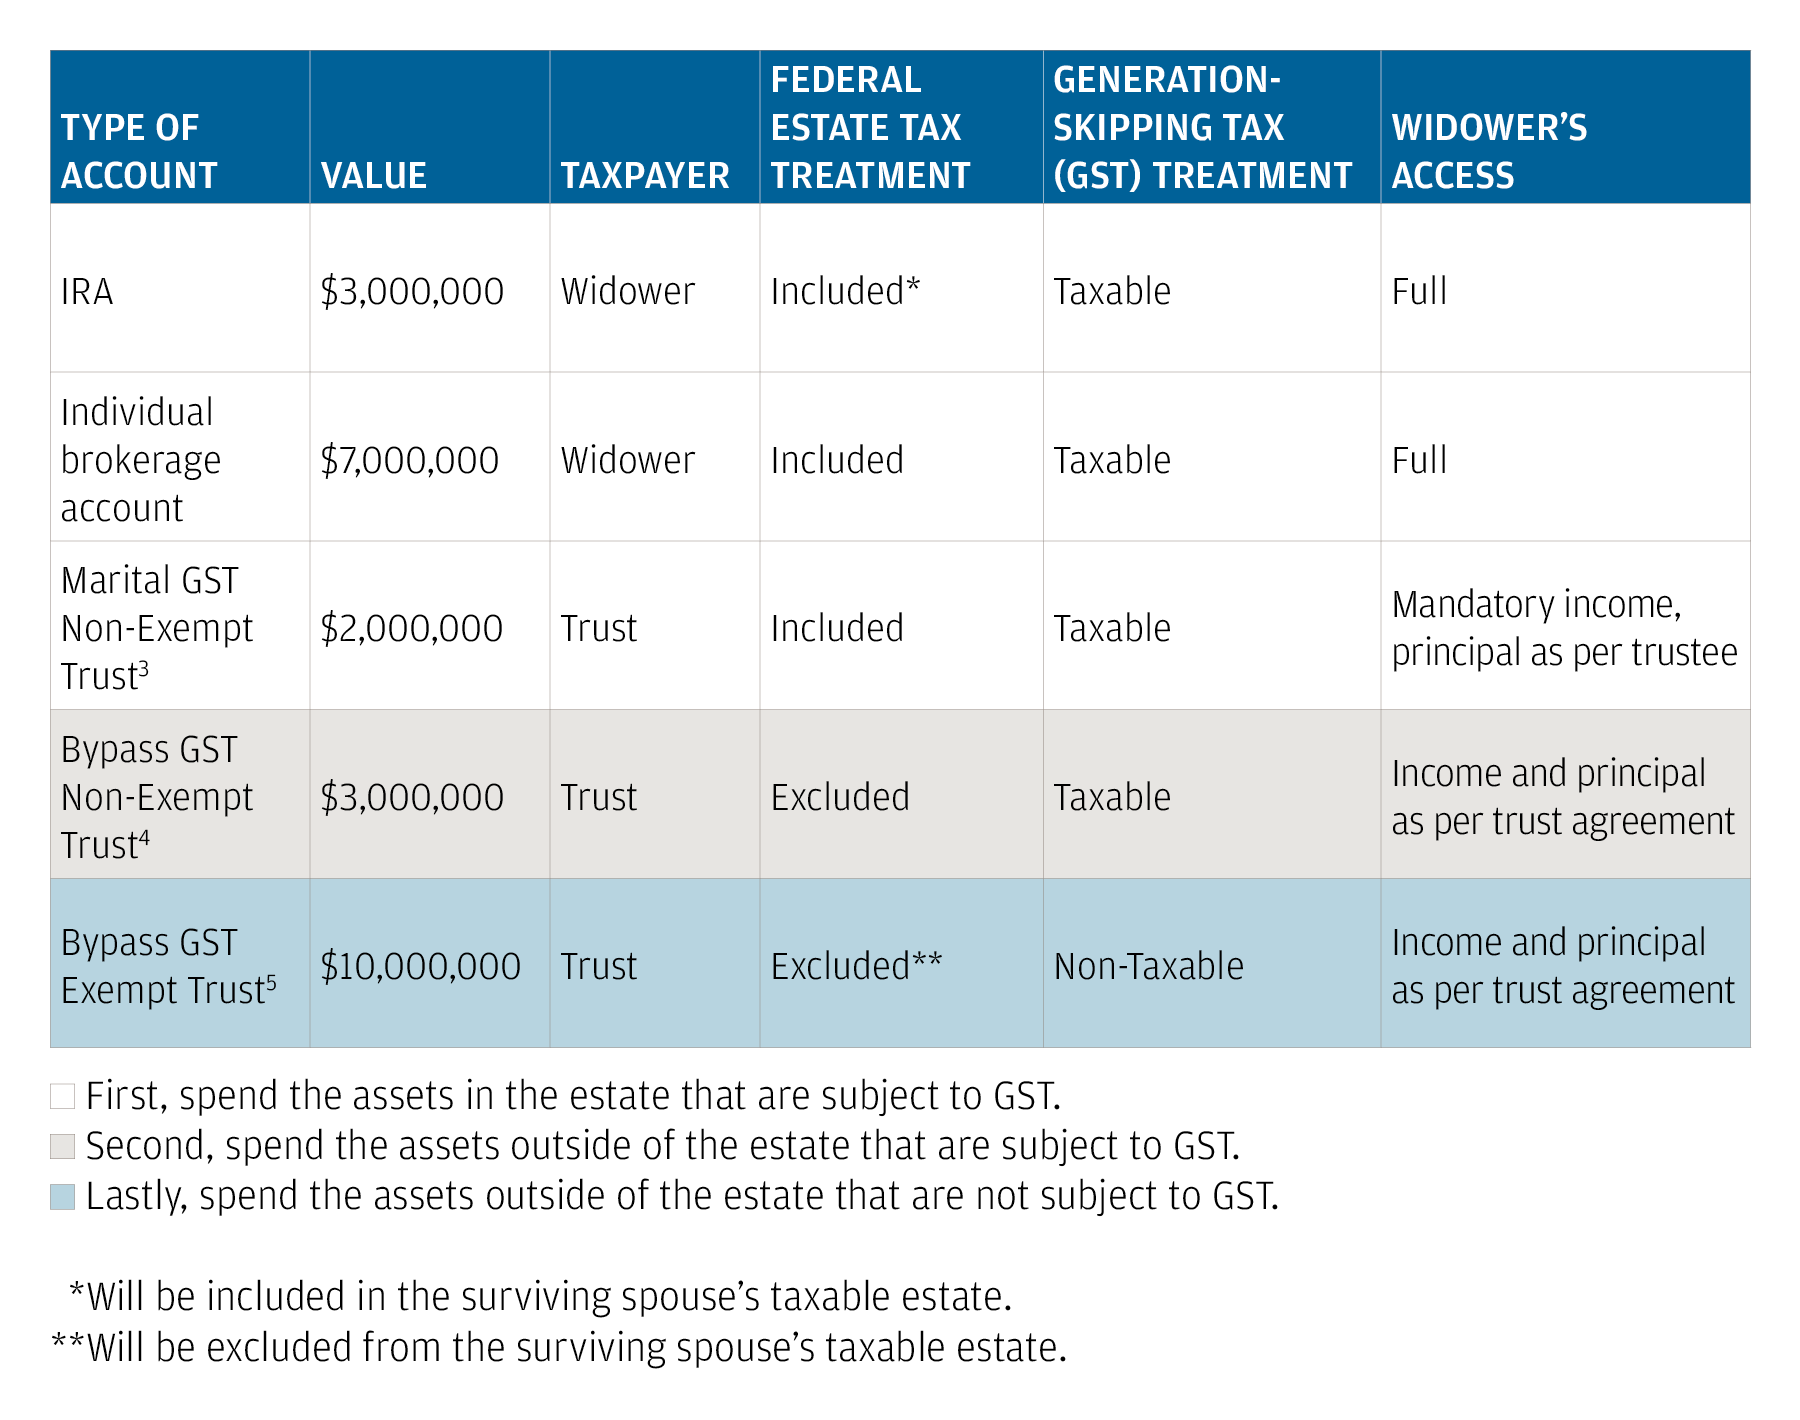 This example directs the widower to spend assets from each account in the following order. First, spend the assets in the estate that are subject to the generation-skipping tax (GST). Second, spend the assets outside of the estate that are subject to the GST. Lastly, spend the assets outside of the estate that are not subject to the GST.